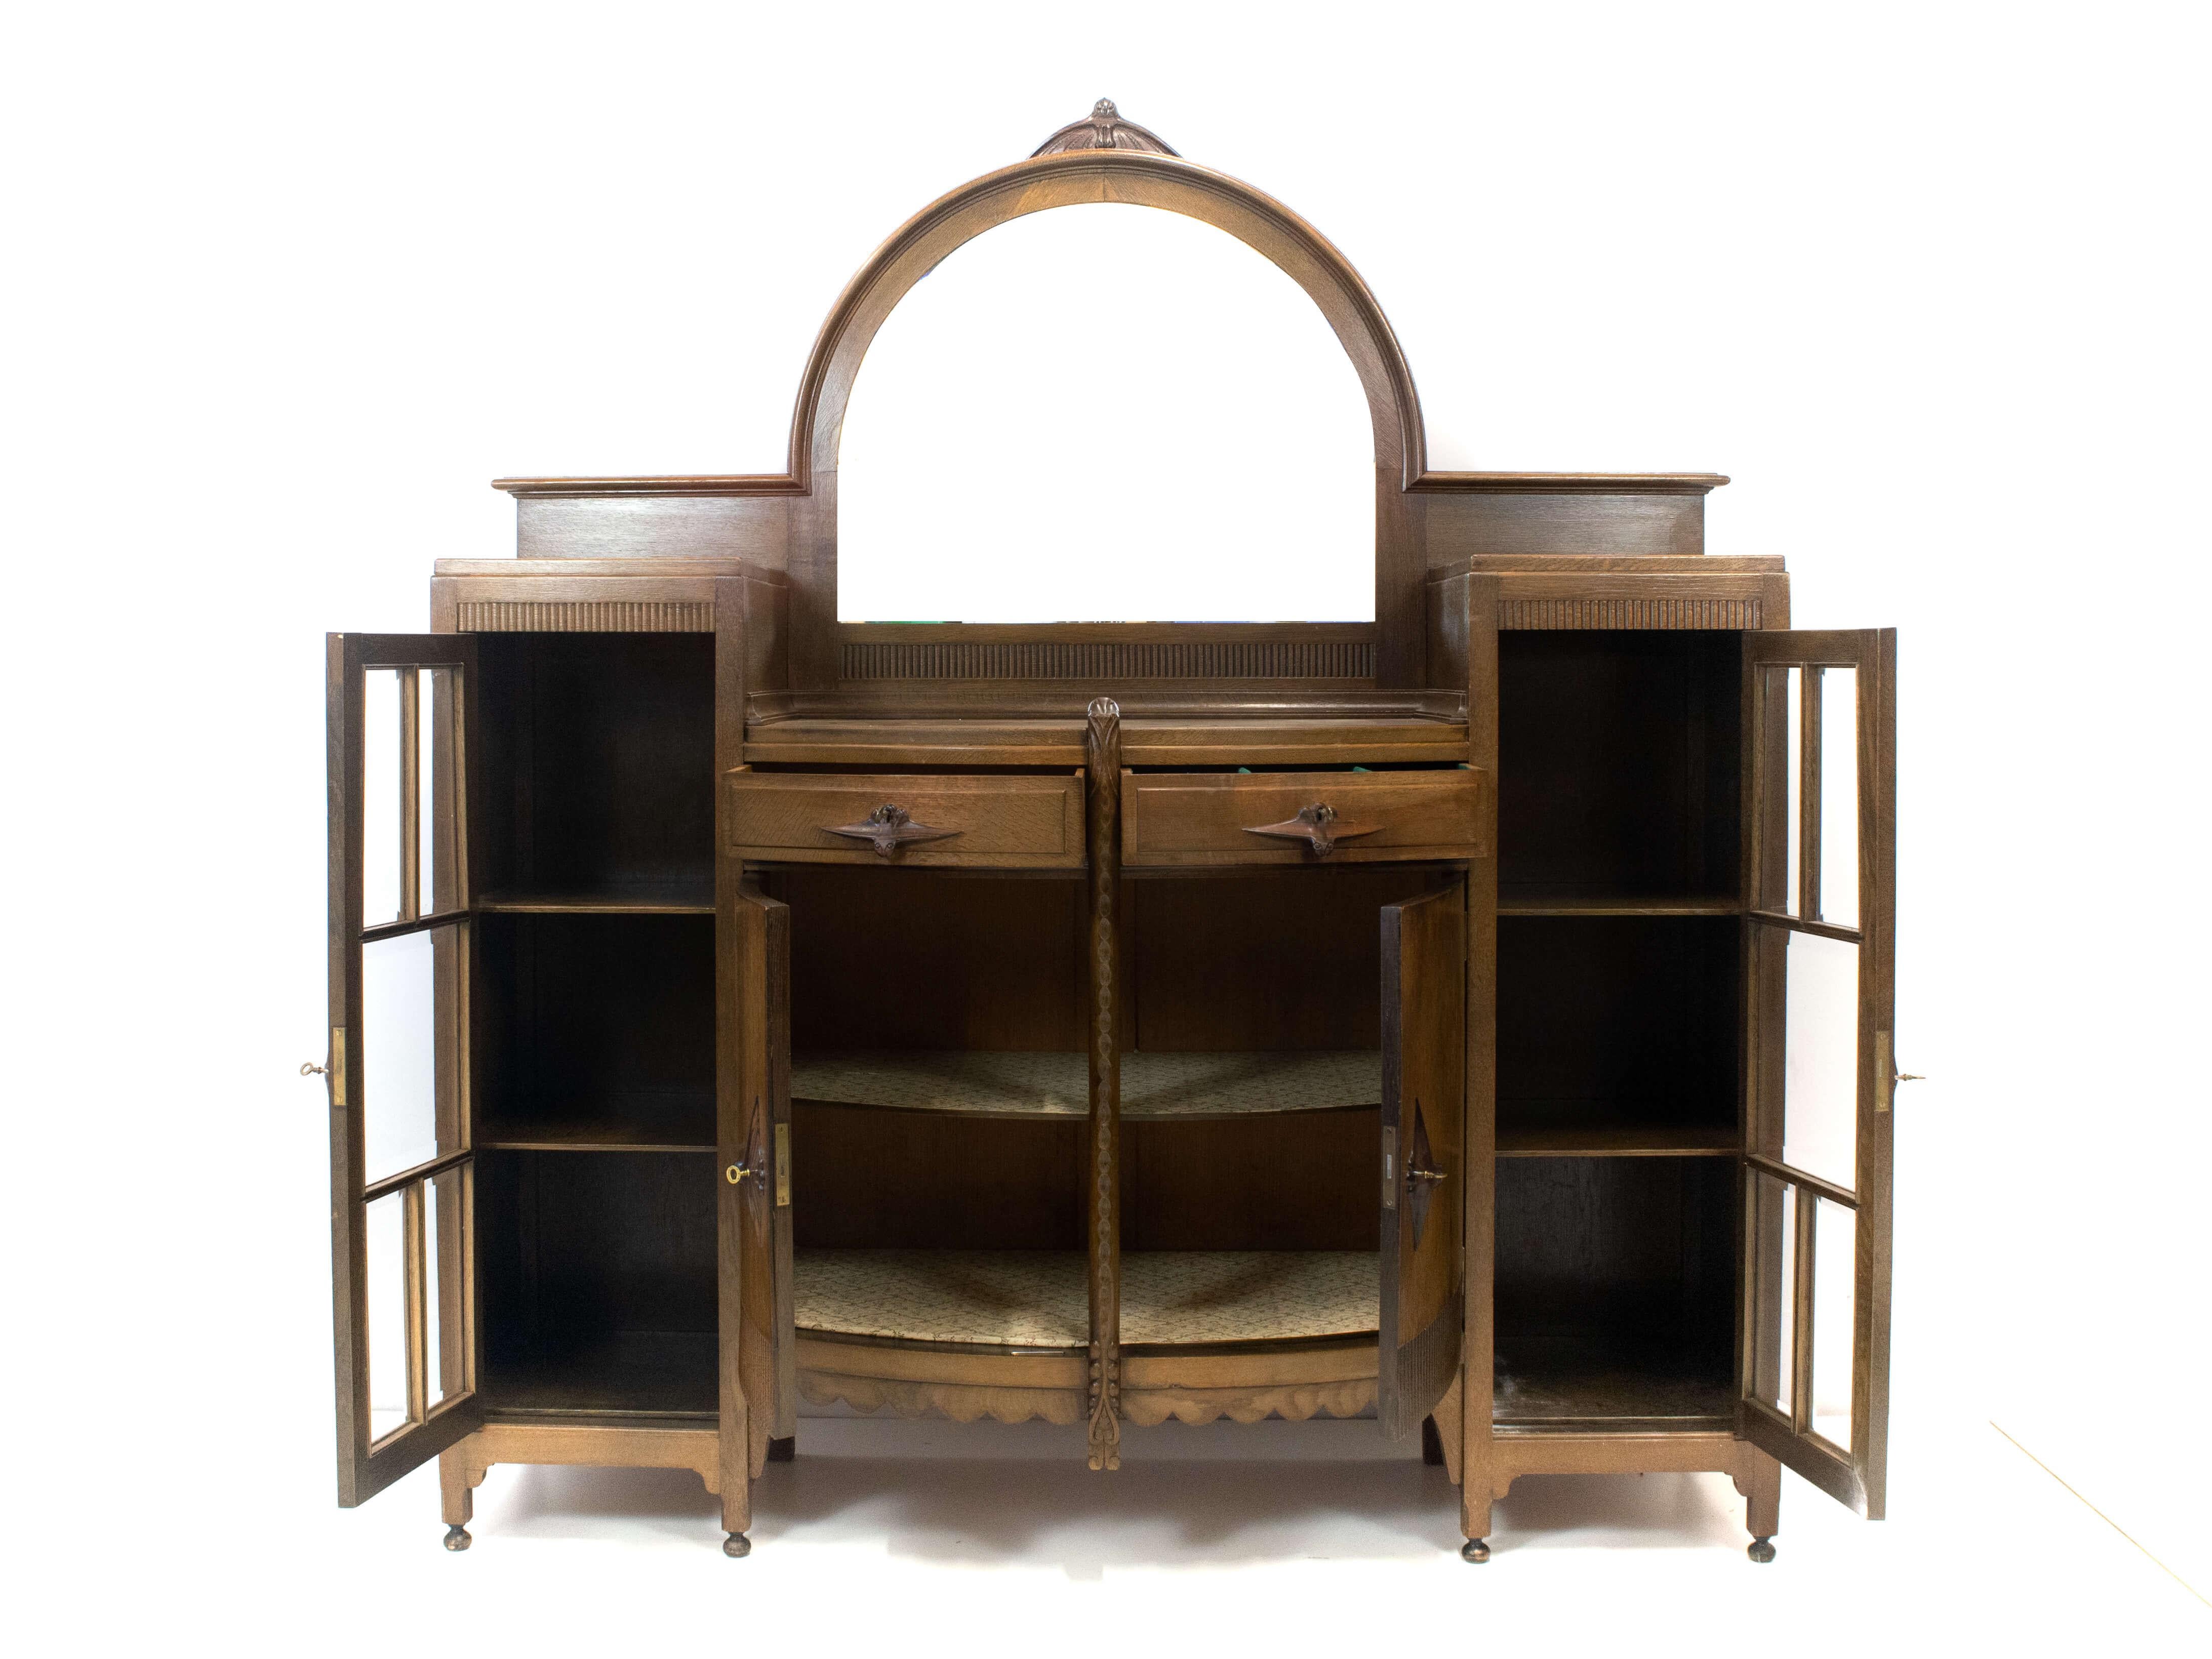 Impressive Amsterdam School bar cabinet by J.Th. Drilling, The Netherlands 1920s. This bar cabinet has two faceted glass doors, two round-shaped closed doors and two round-shaped drawers. On top of the cabinet is a large mirror with one small crack